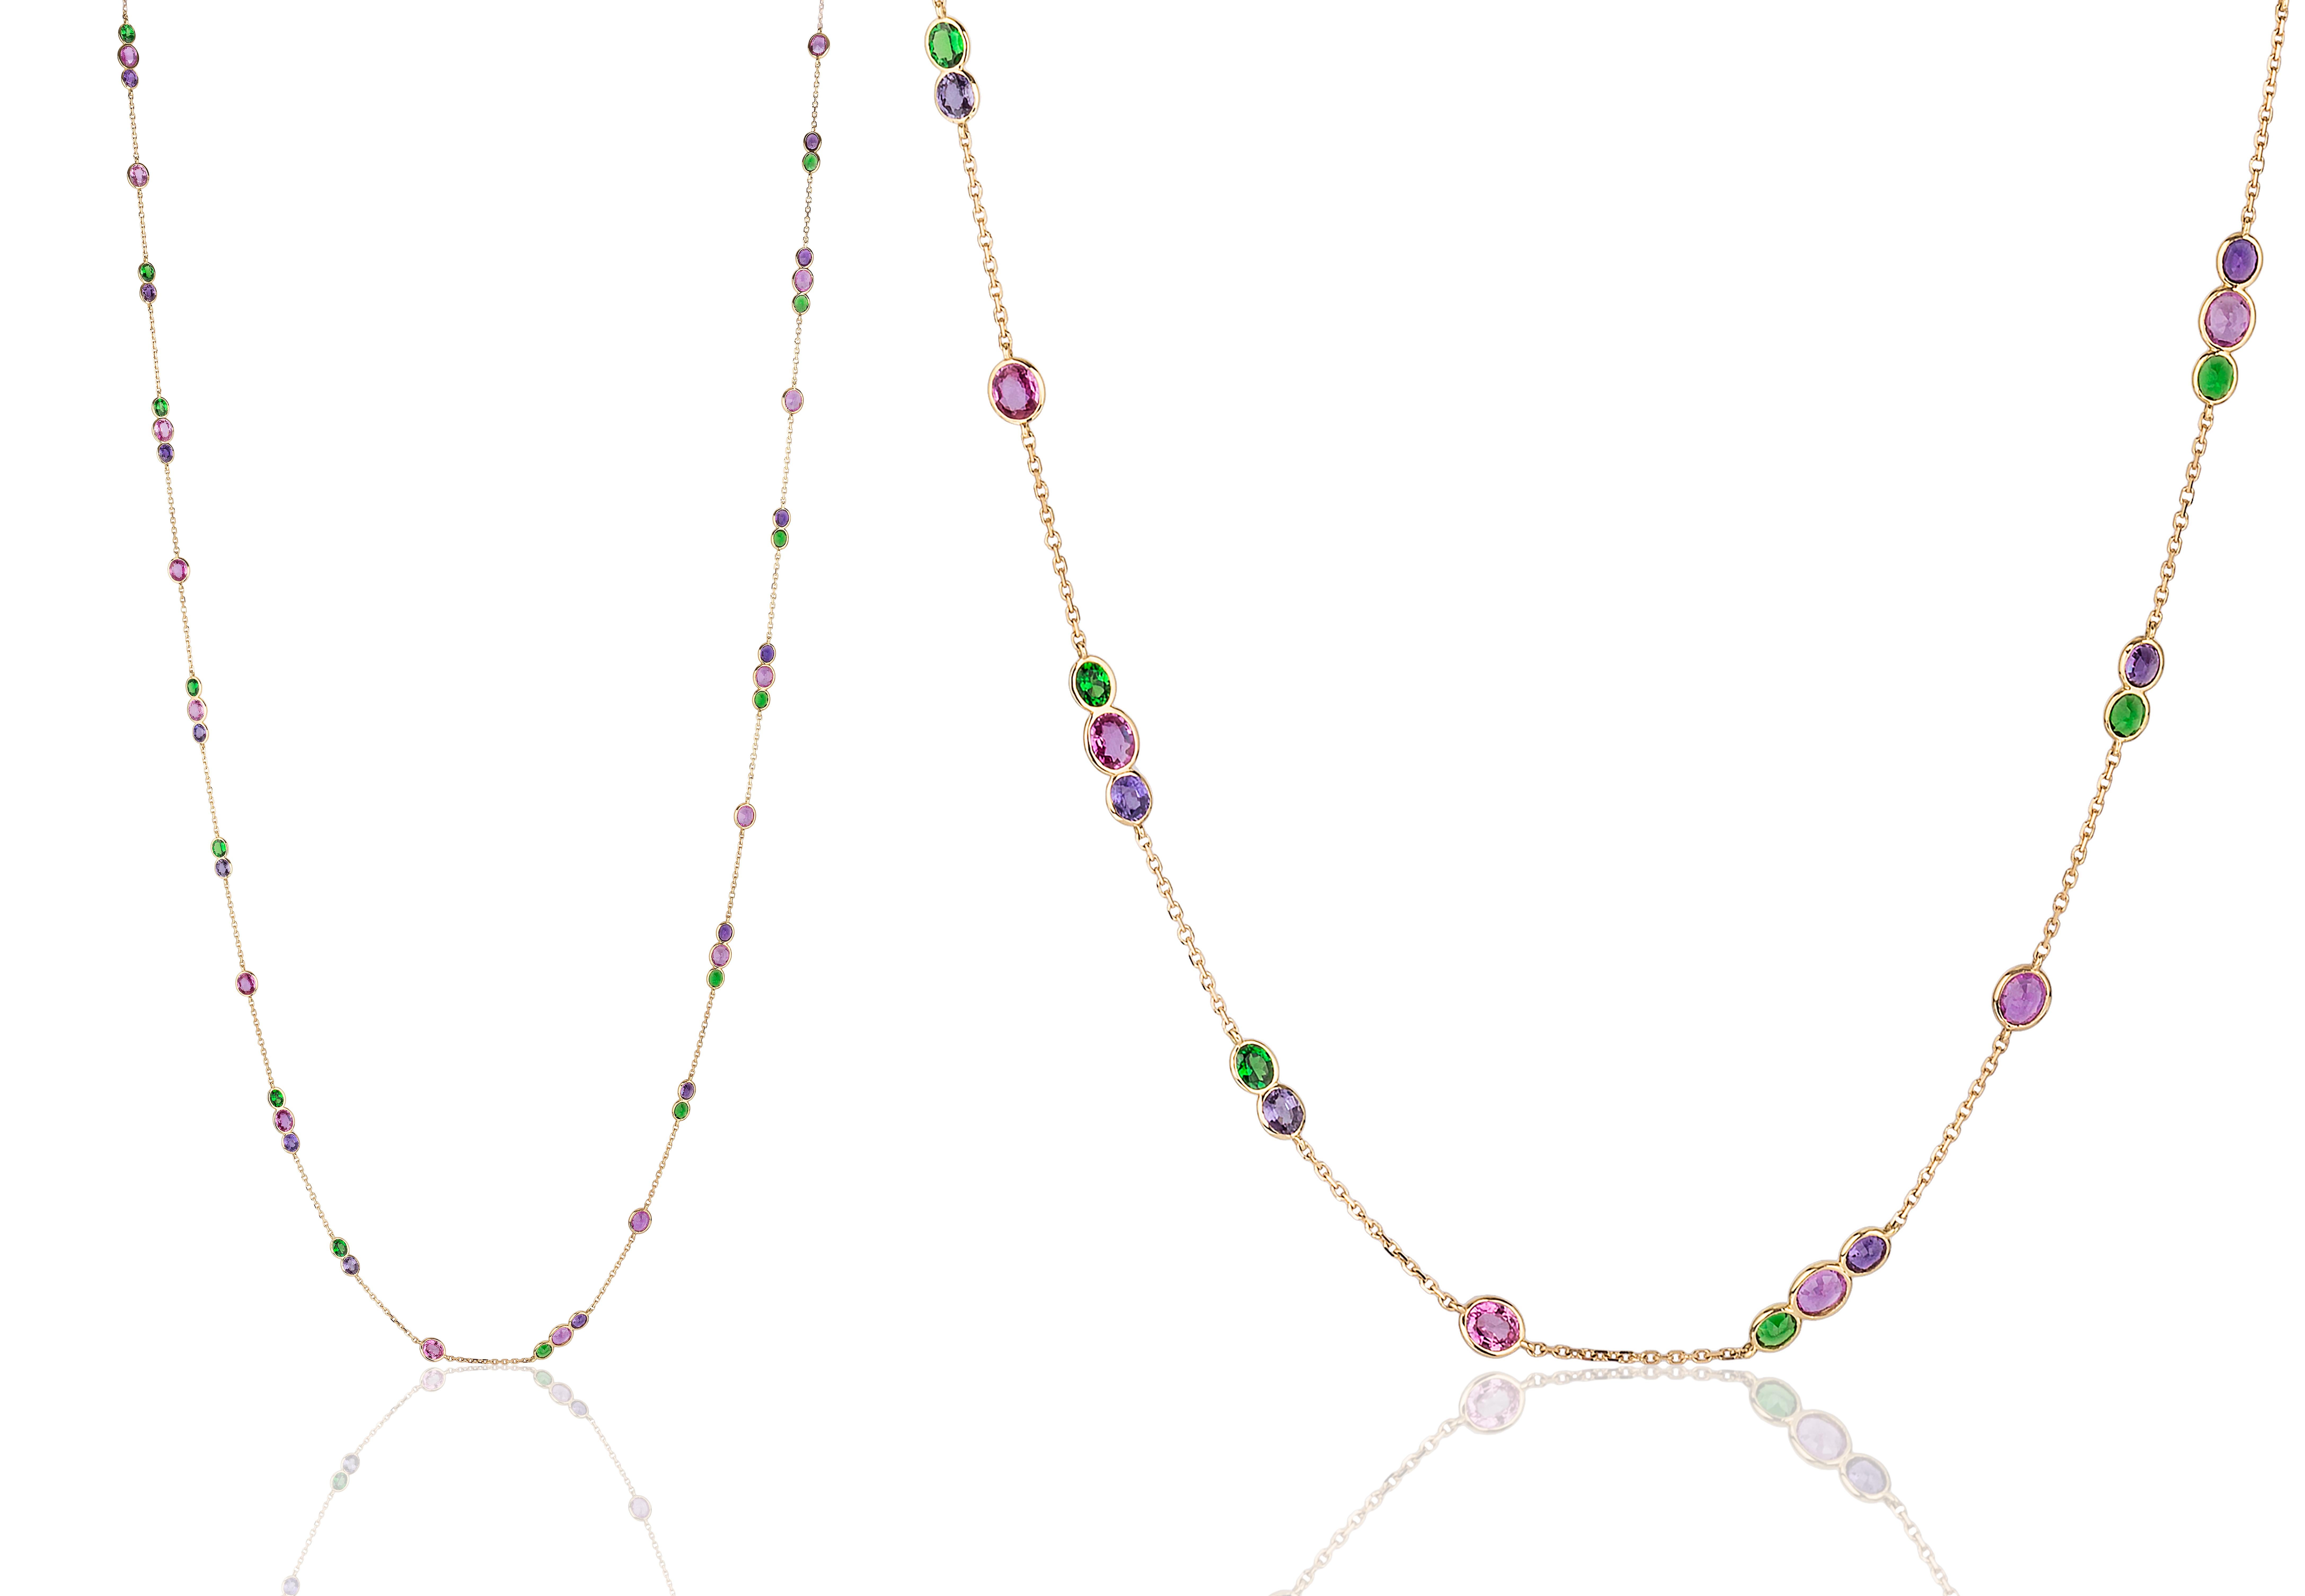 Discover this limited-edition Multi Sapphire & Tsavorite Necklace, elegantly designed in 18K Yellow Gold. This necklace features a collection of carefully chosen sapphires and tsavorites adorning the delicate chain. Its refined craftsmanship and